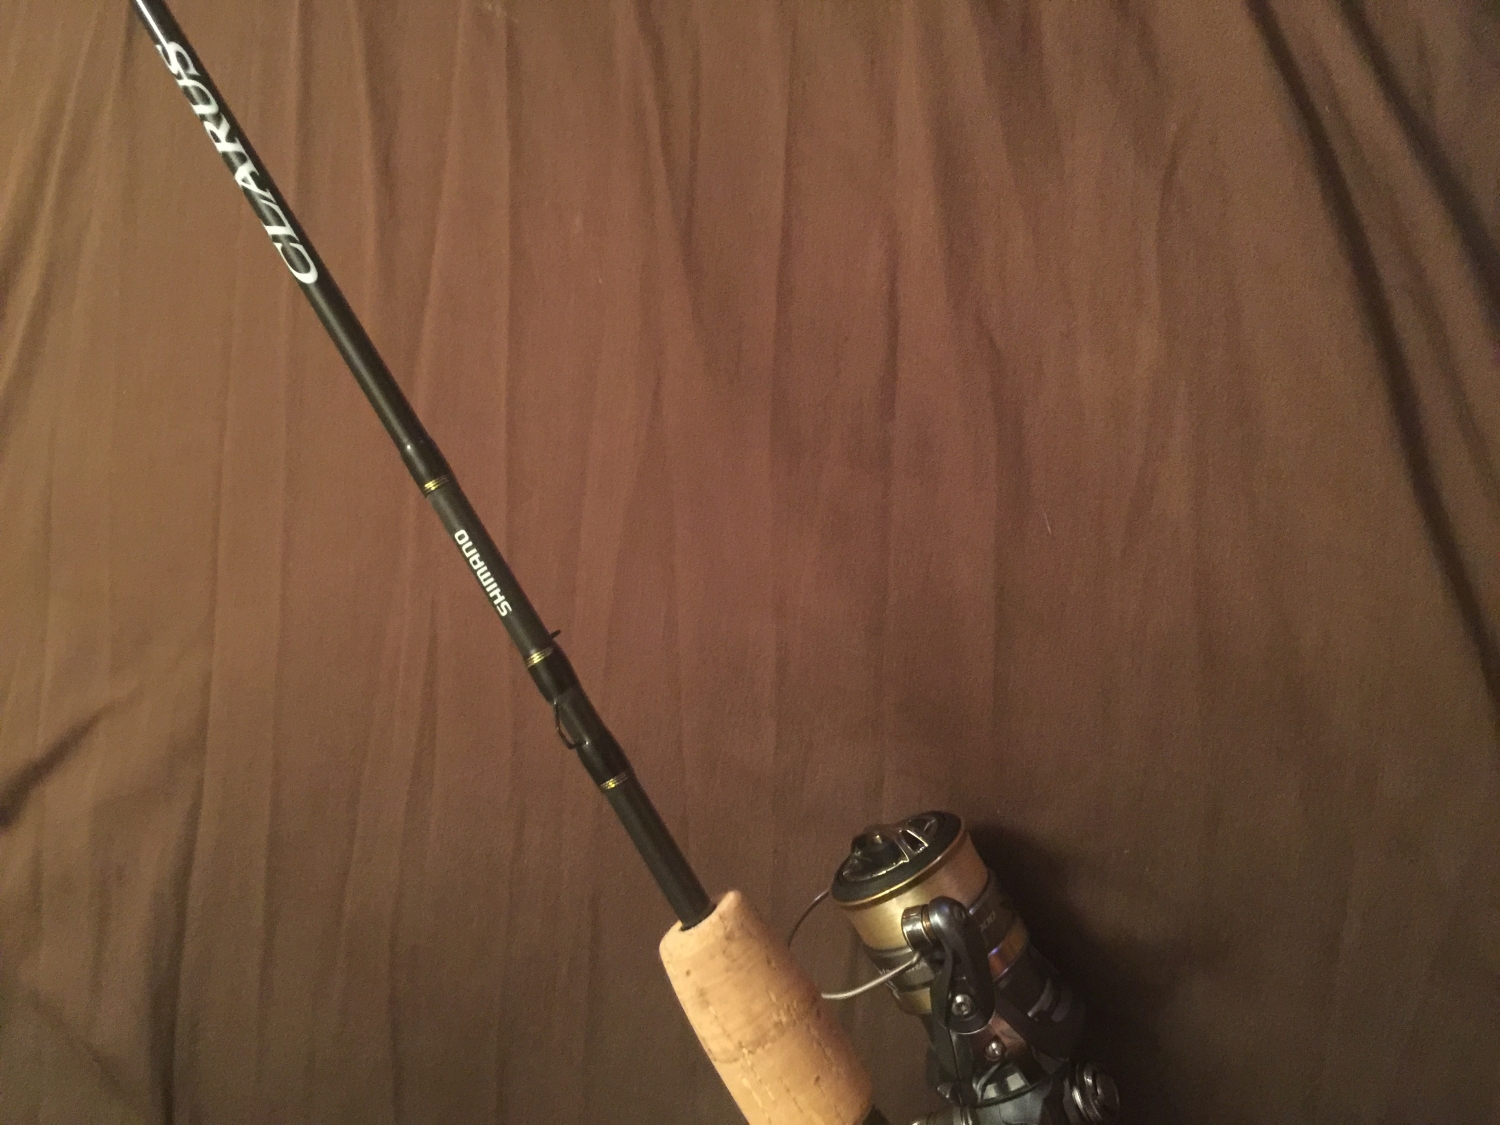 Shimano CSS70MD Clarus D Spinning Rod